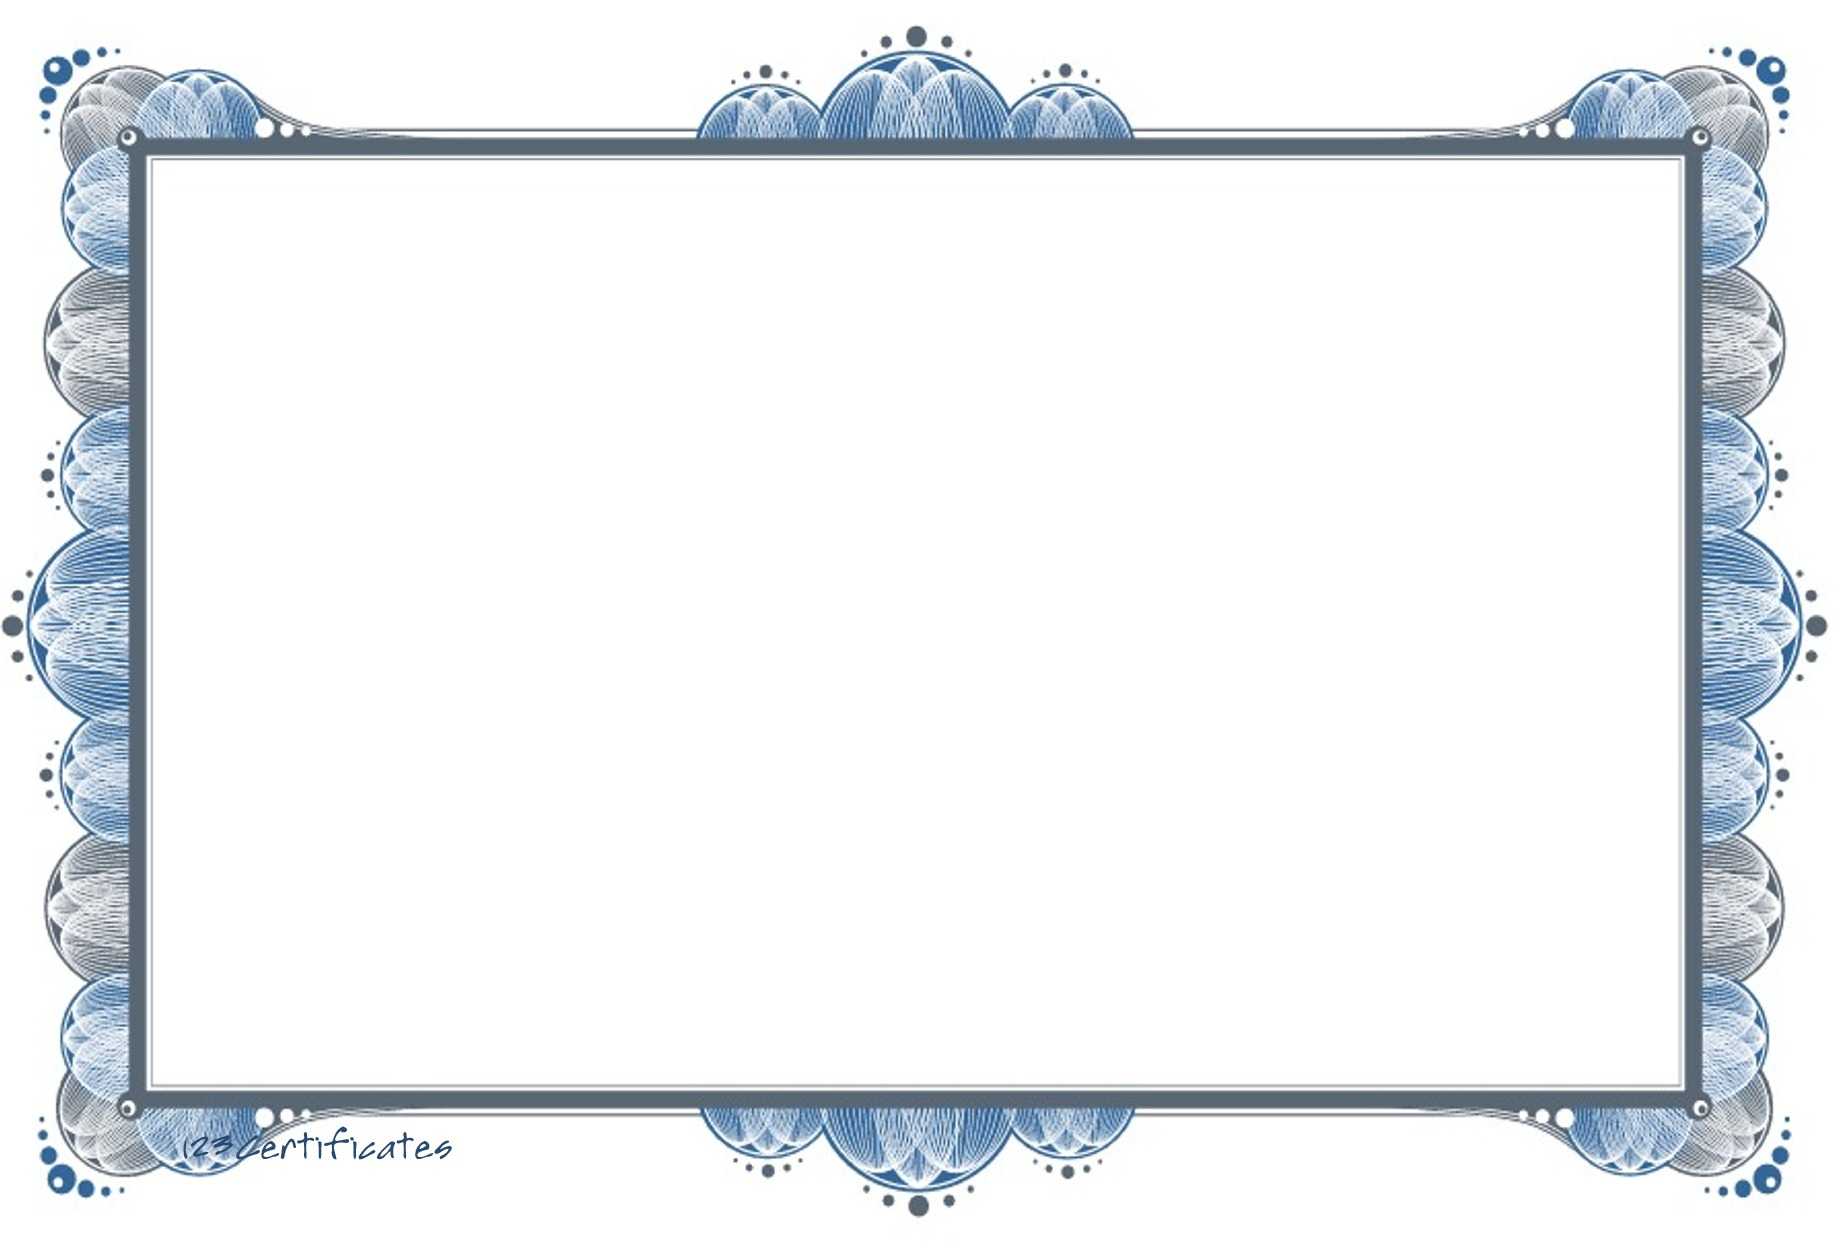 Free Certificate Borders, Download Free Clip Art, Free Clip For Award Certificate Border Template